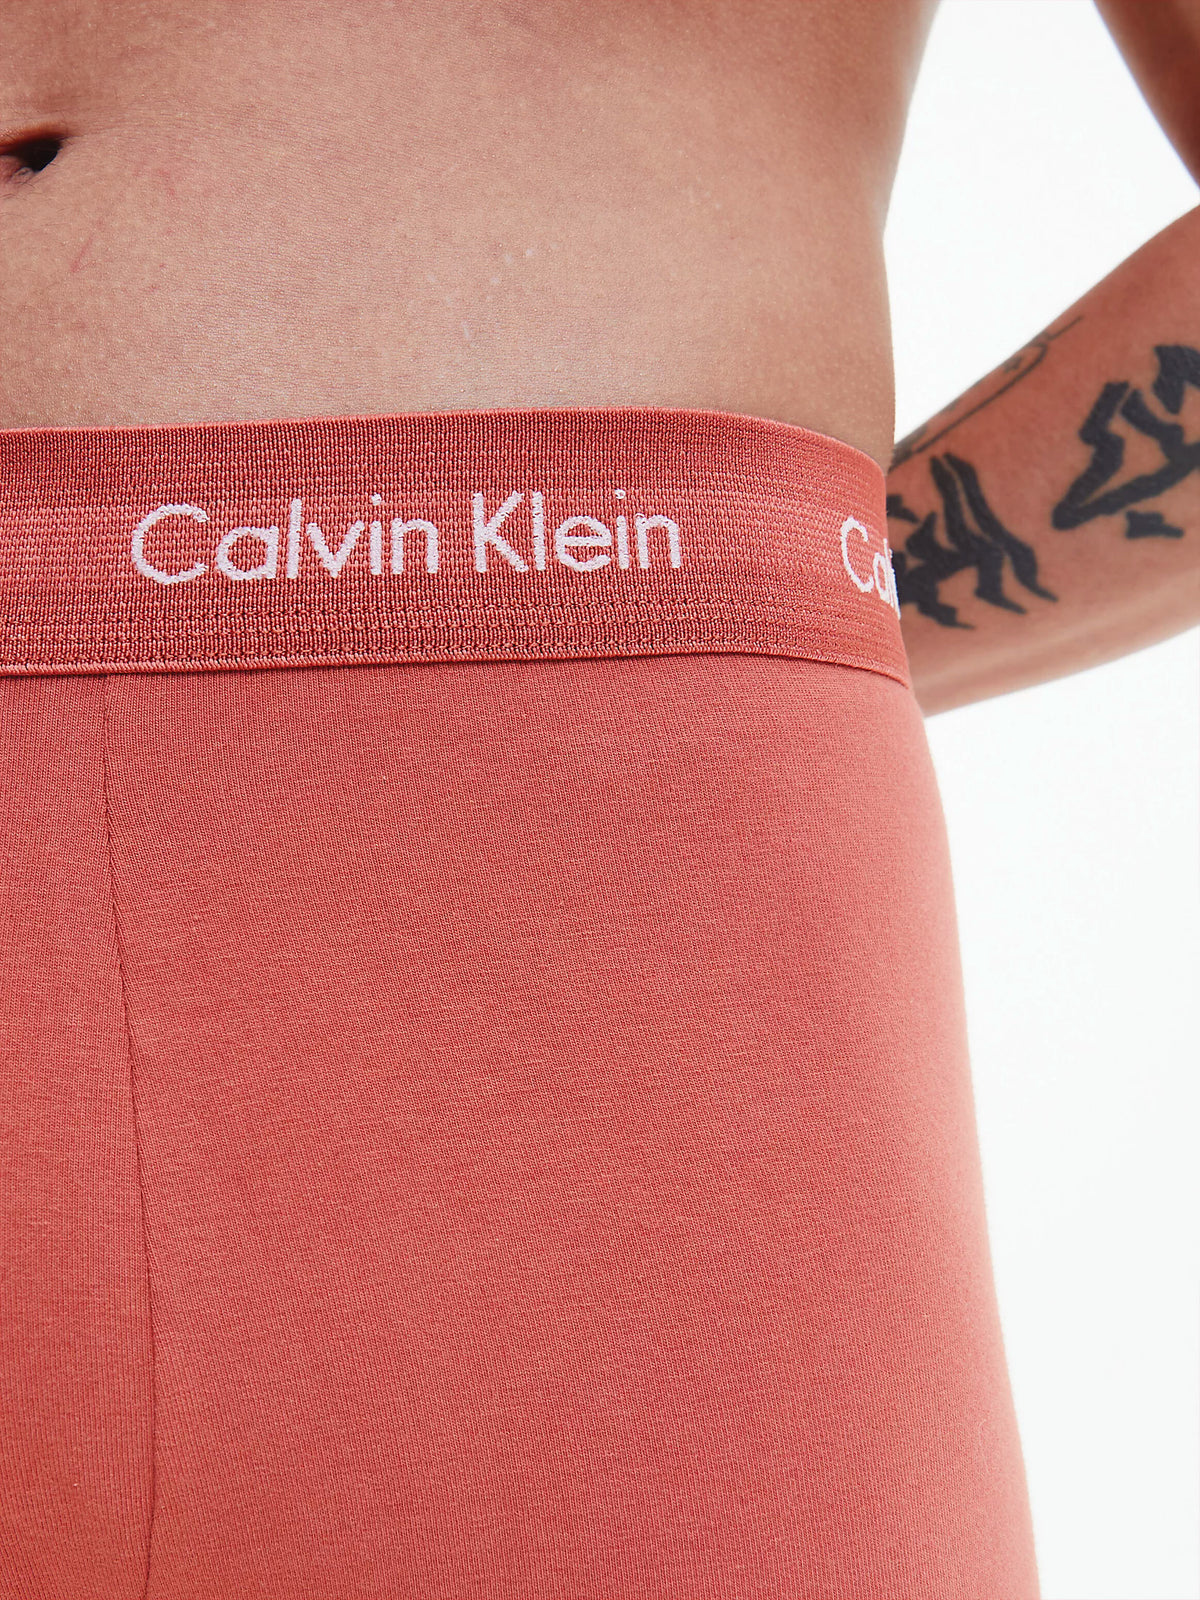 Mens Calvin Klein Boxer Shorts Low Rise Trunks 3 Pack, 04, U2664G, Dusty Cppr/ Bright Wht/ Hsphr Blue